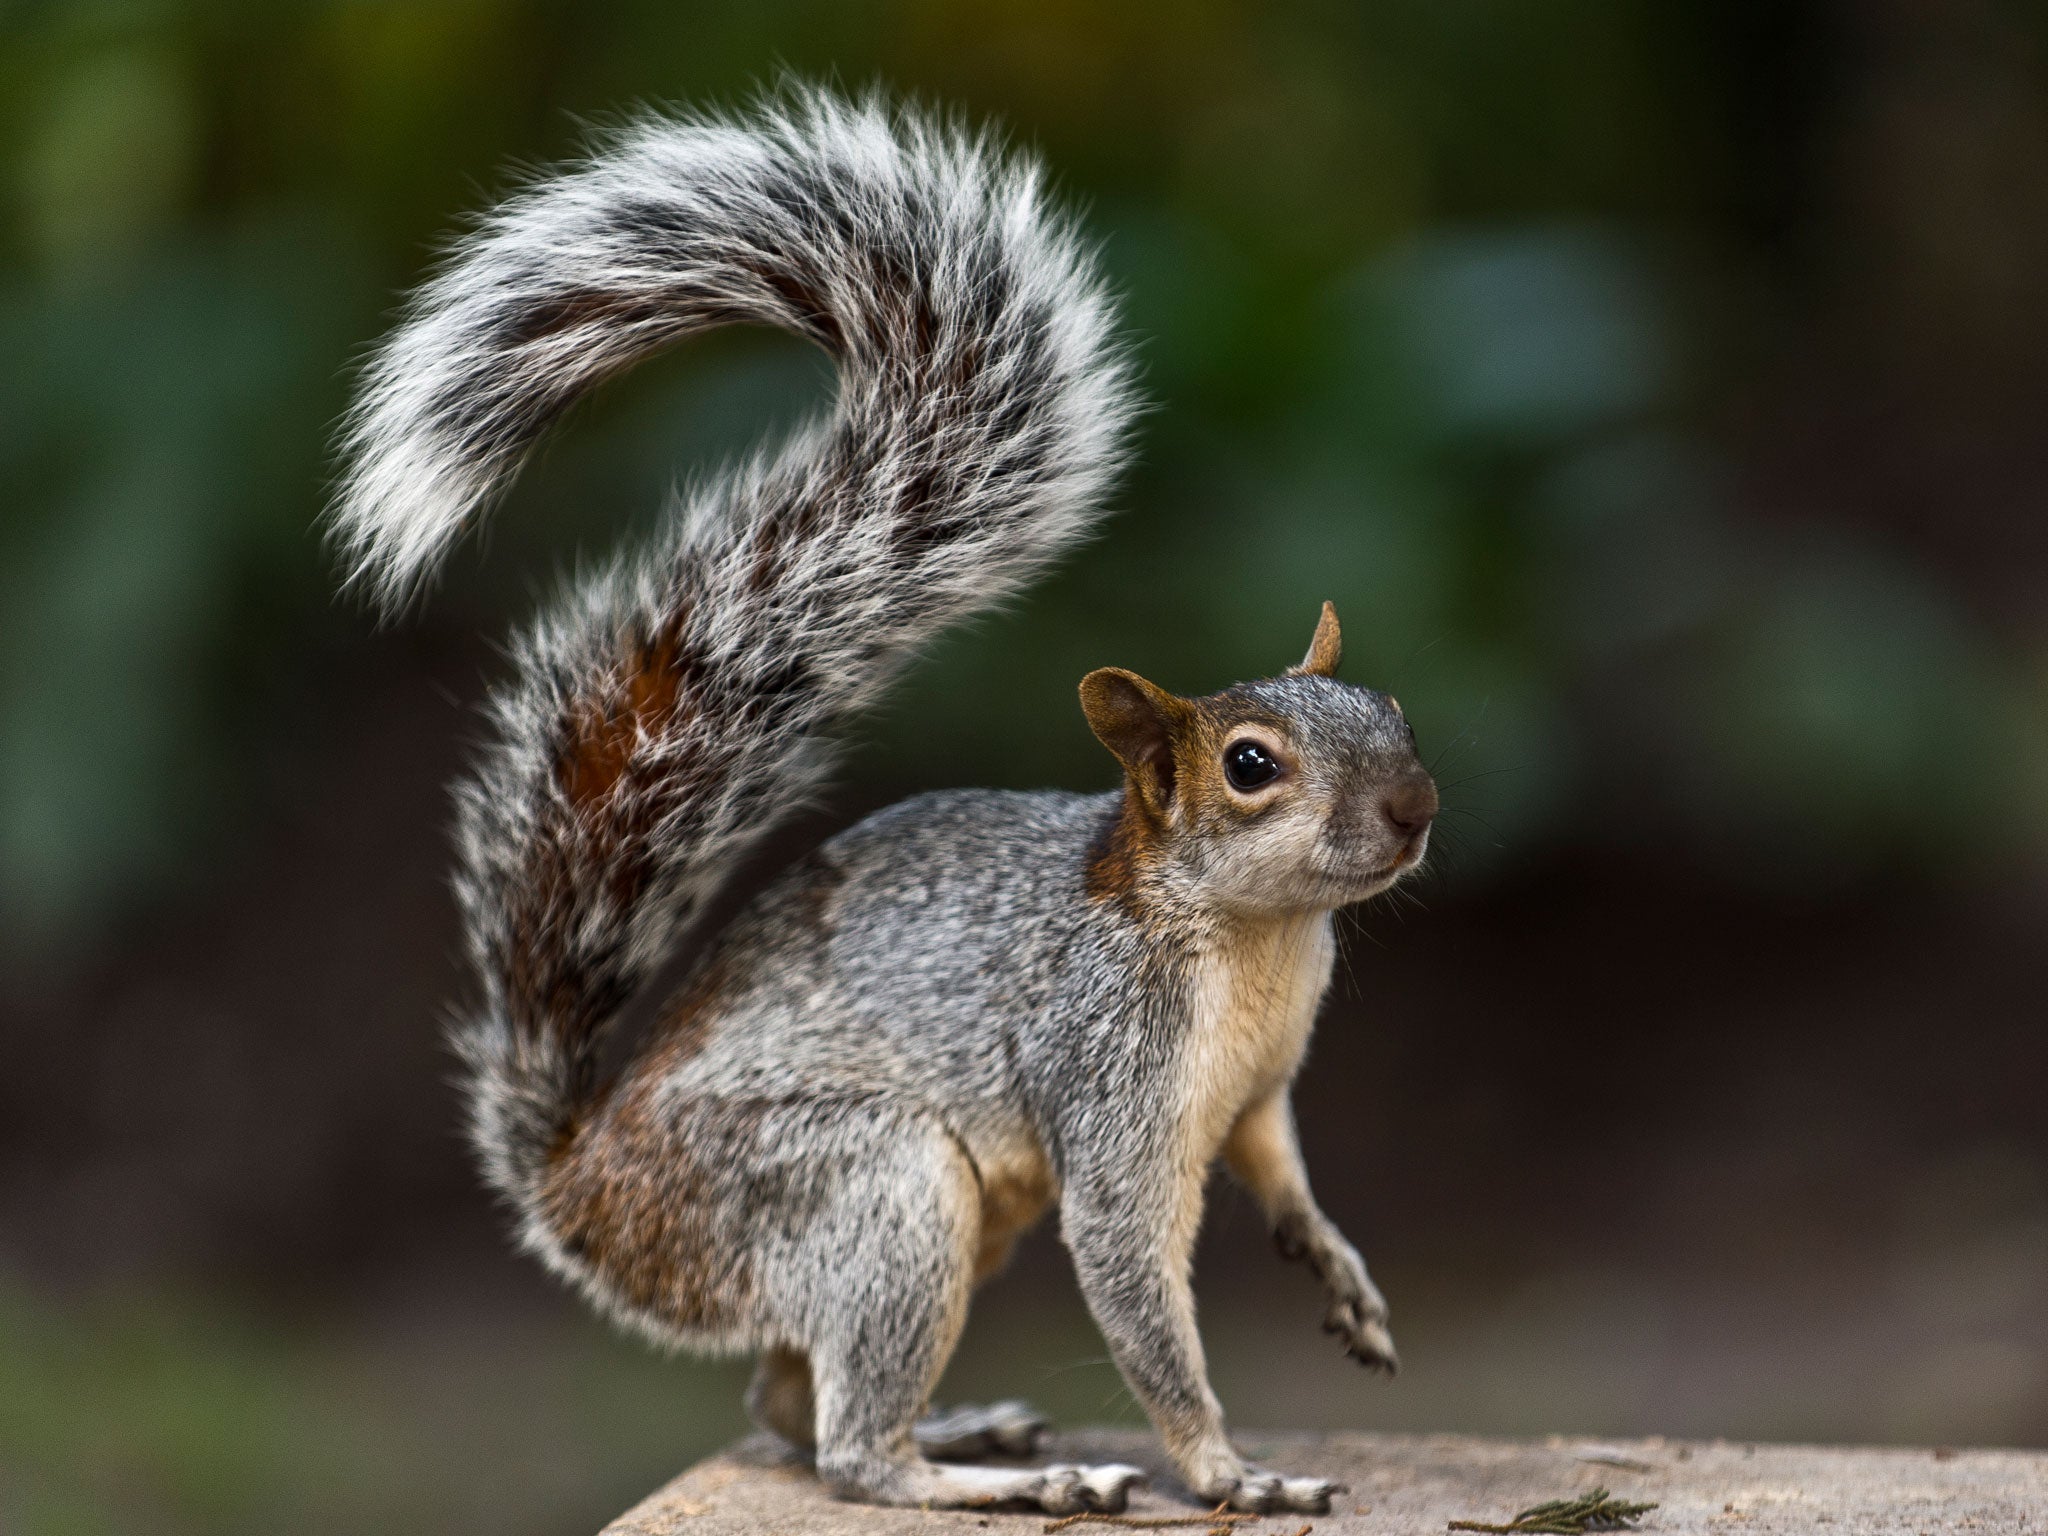 The squirrel left Margaret Bousfield with a repair bill for £7,000 after trashing her front room.